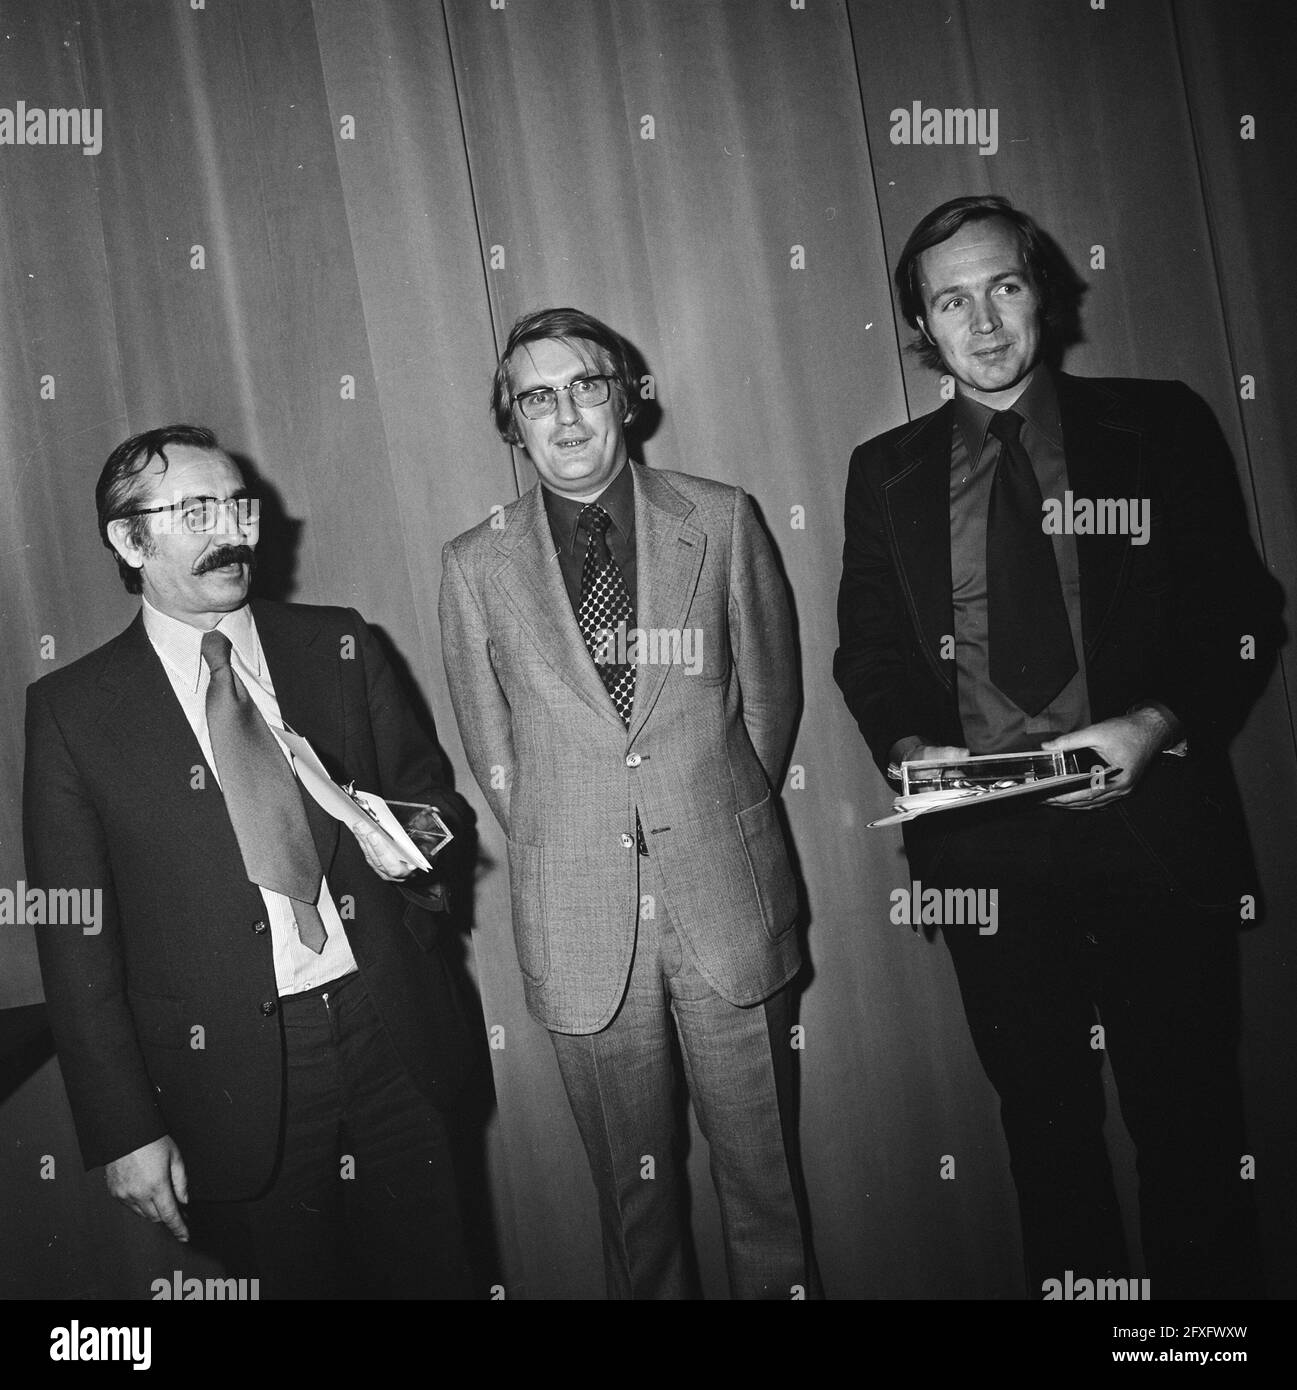 From left to right Henk Barnard, Wim Meijer, JanTerlouw, October 27, 1973, literary awards, award ceremonies, writers, secretaries of state, The Netherlands, 20th century press agency photo, news to remember, documentary, historic photography 1945-1990, visual stories, human history of the Twentieth Century, capturing moments in time Stock Photo